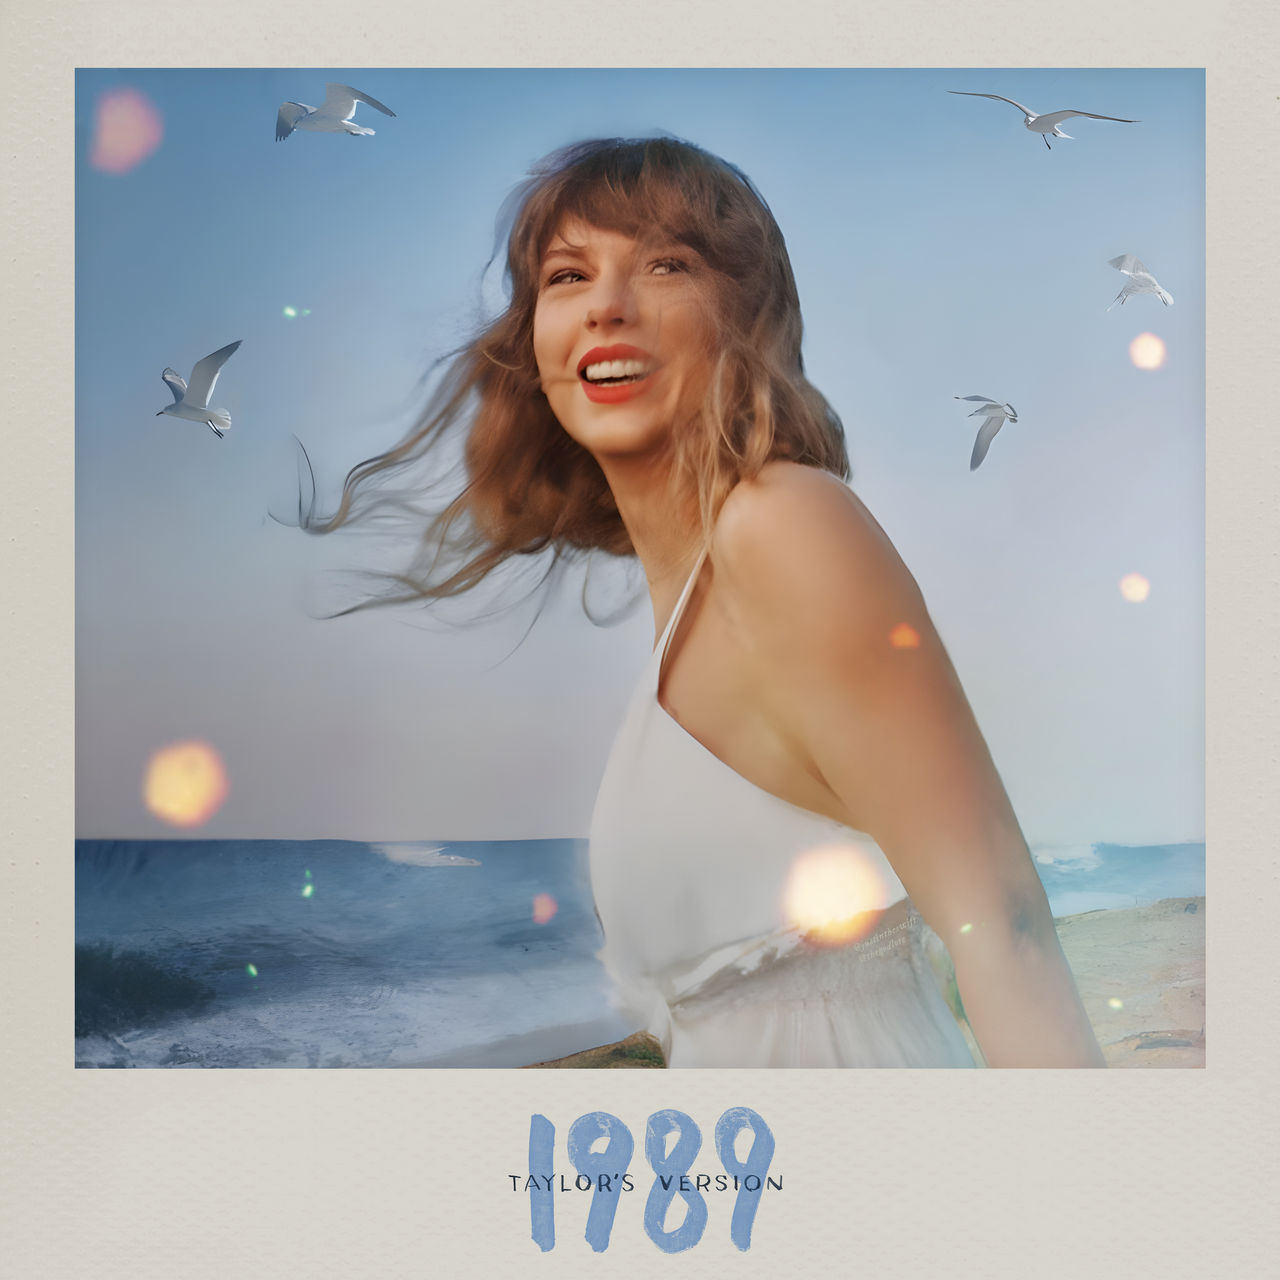 1989 Taylor's Version Album Cover by JustinTheSwift on DeviantArt